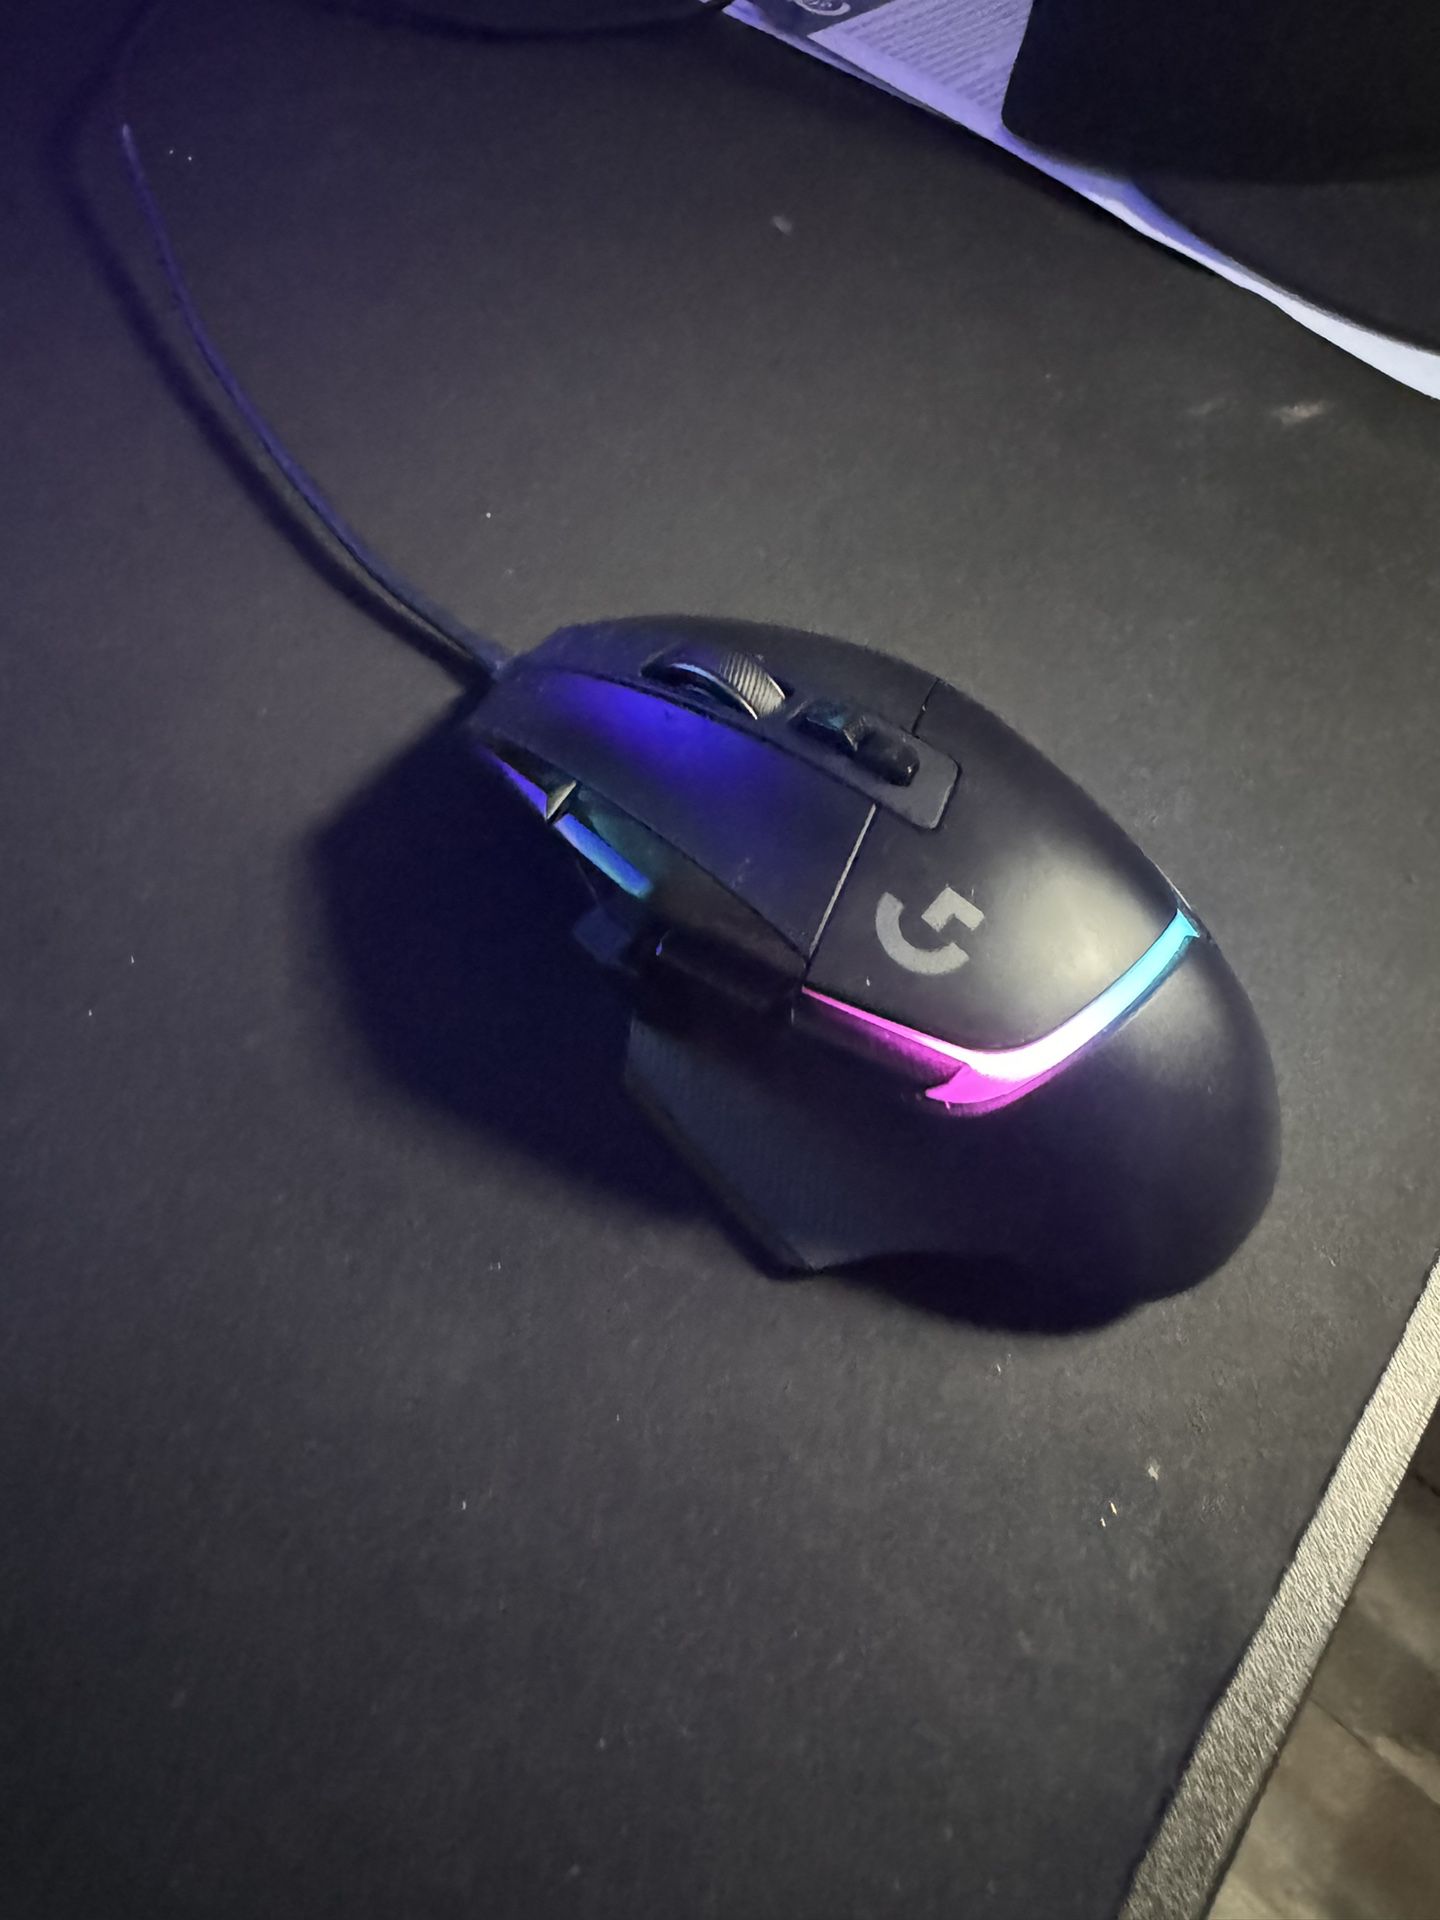 Logictech G502x Wired Gaming Mouse